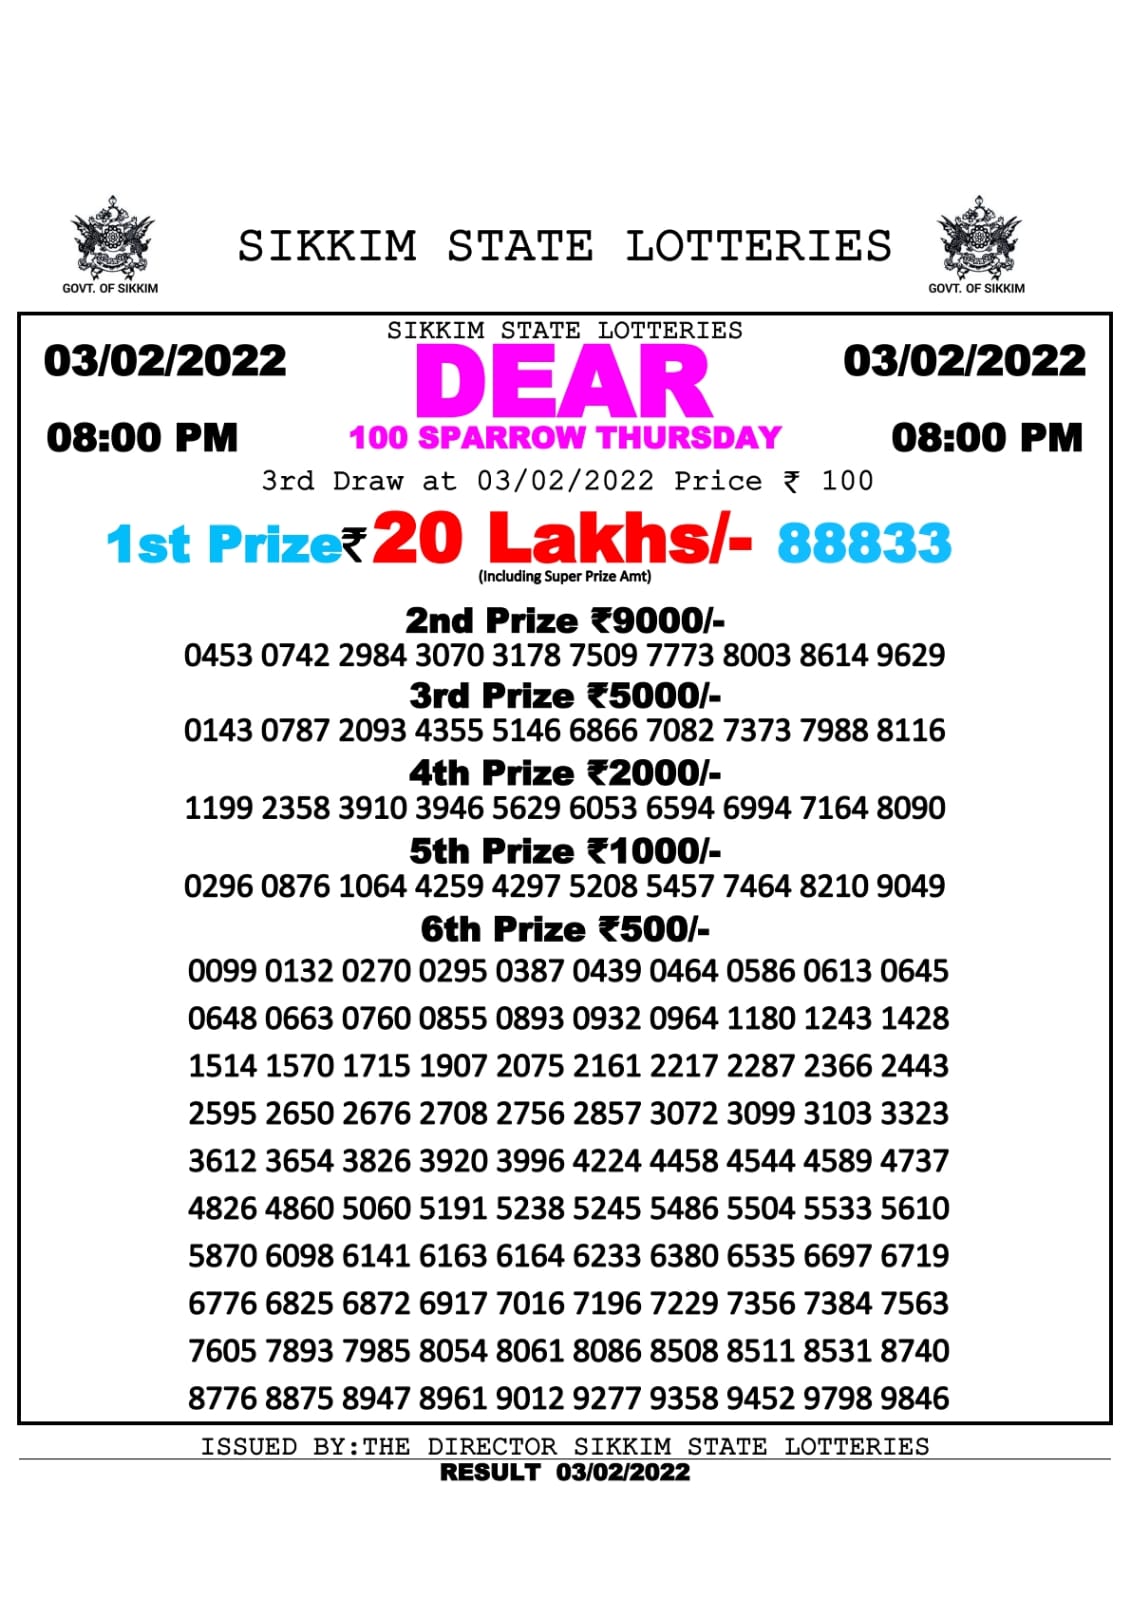 DEAR 100 WEEKLY RESULT 8.00PM 03.02.2022